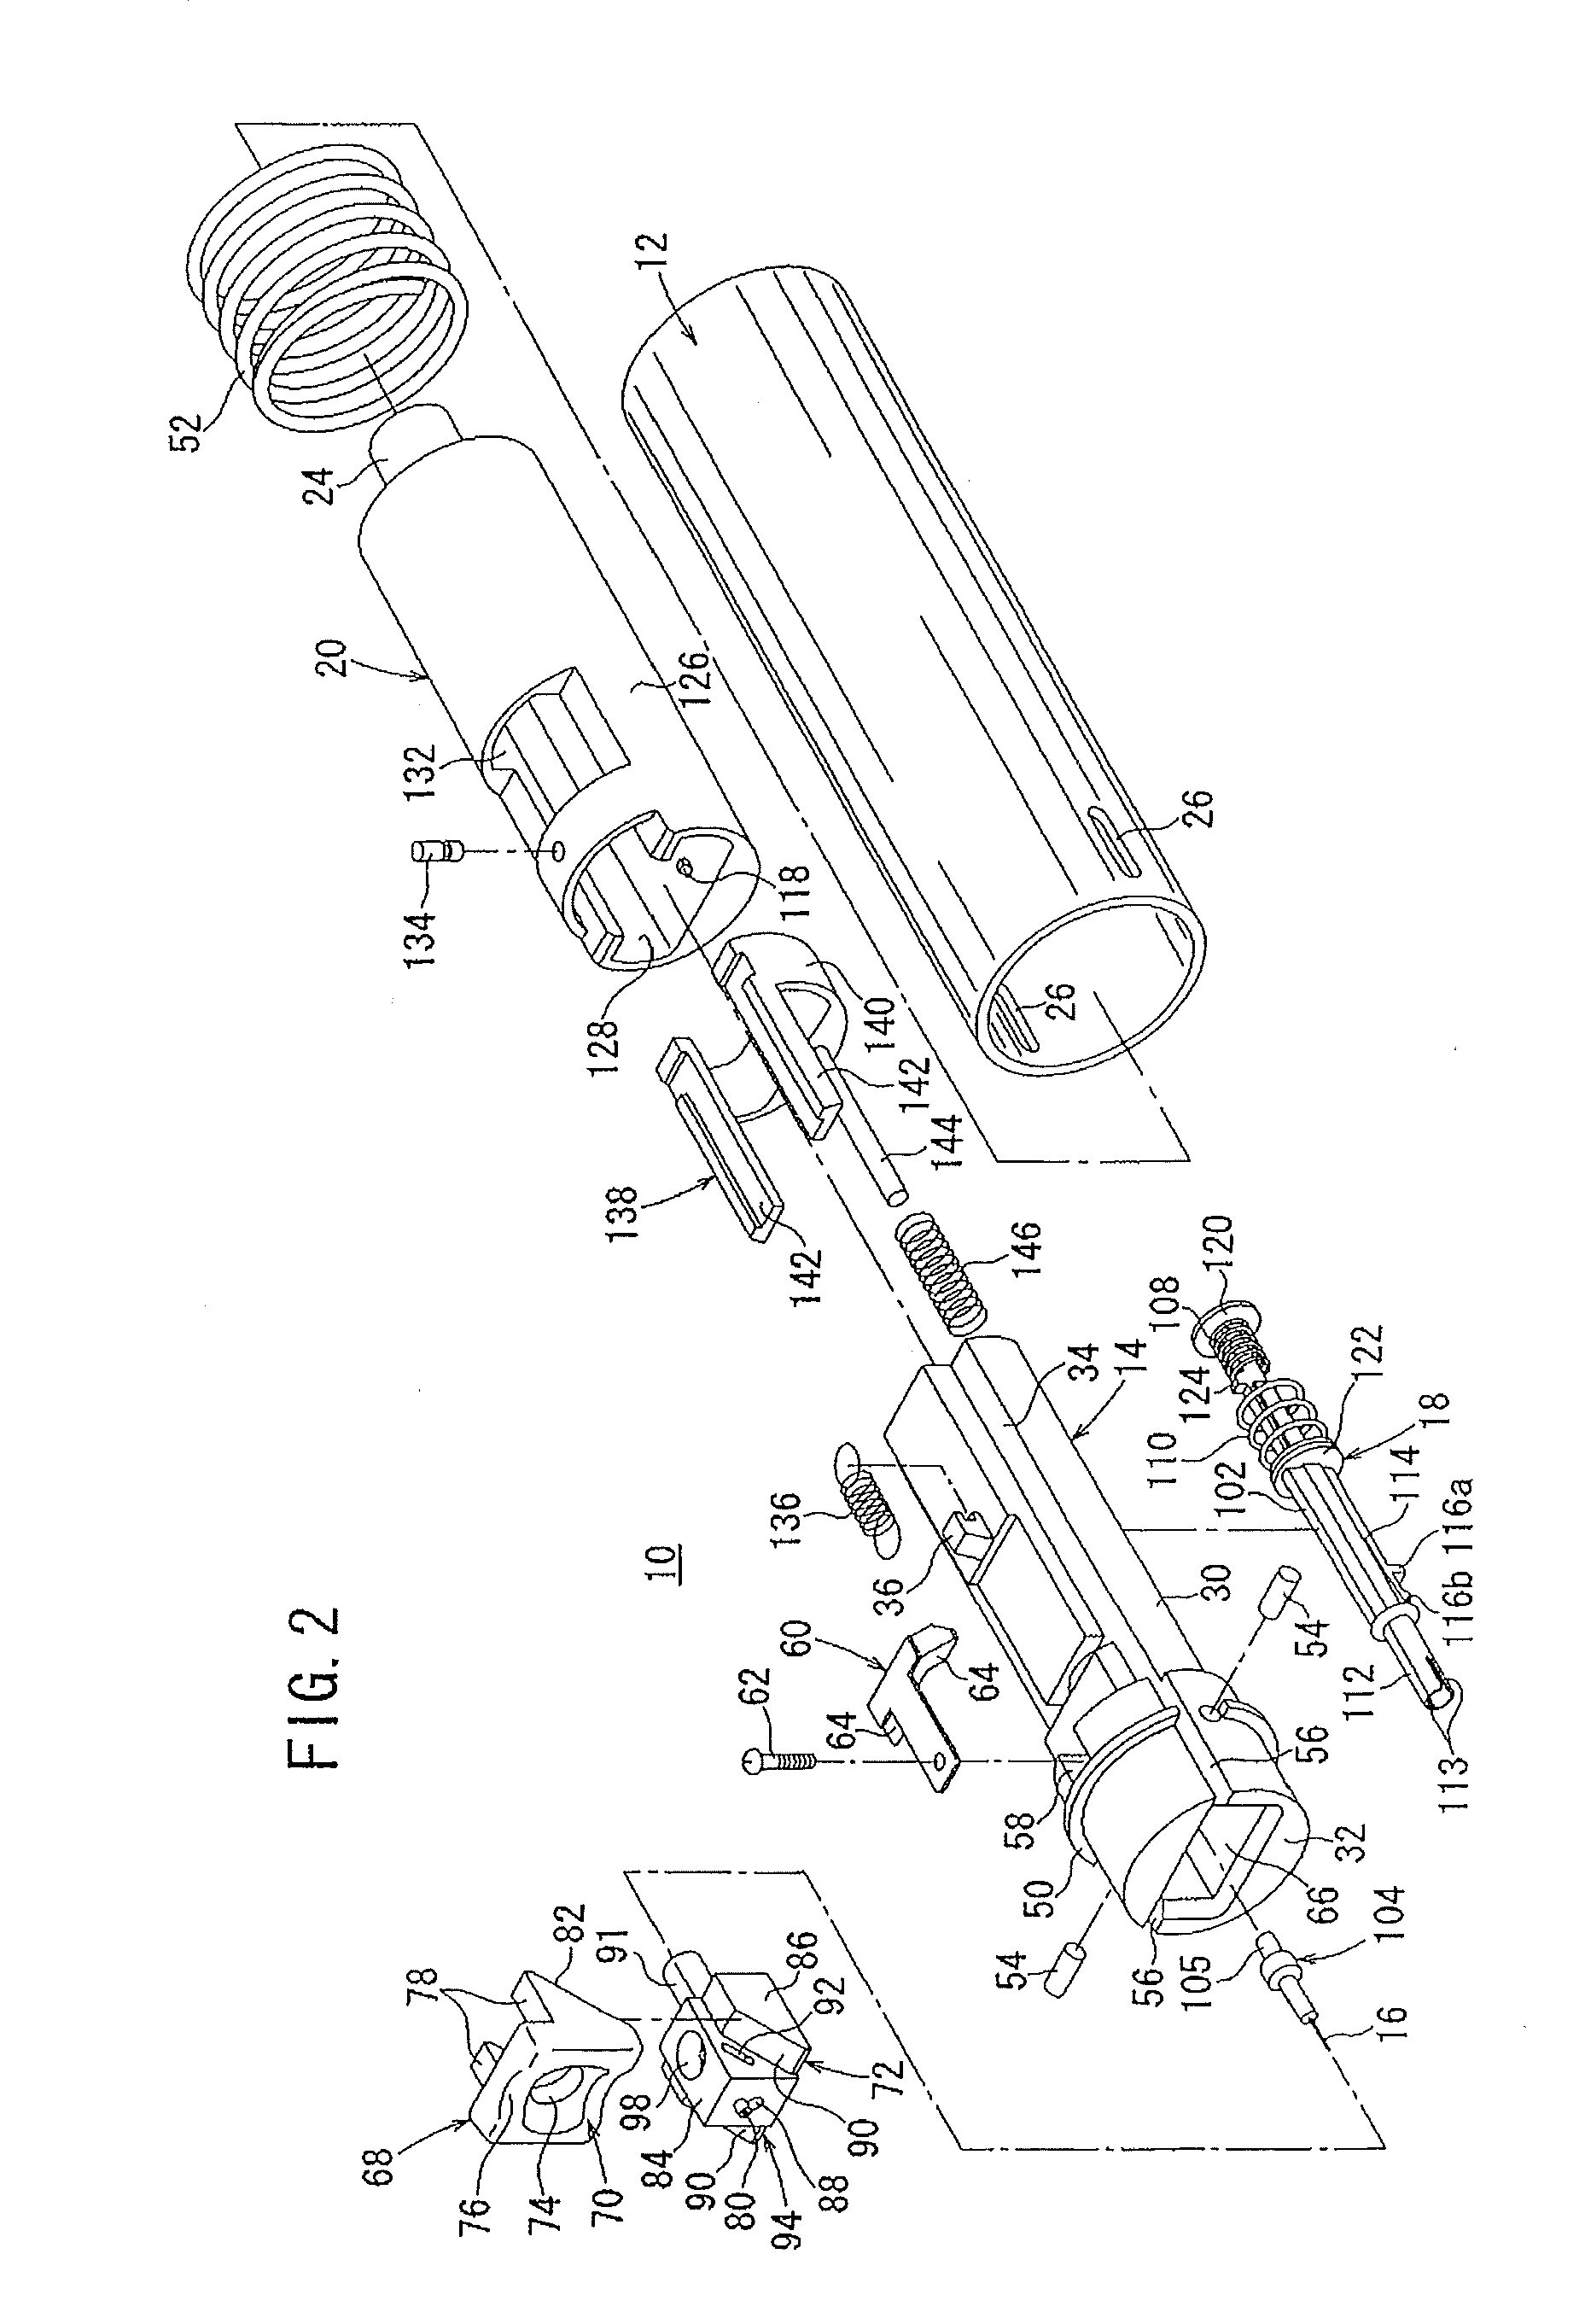 Blood component measurement device and tip for blood measurement